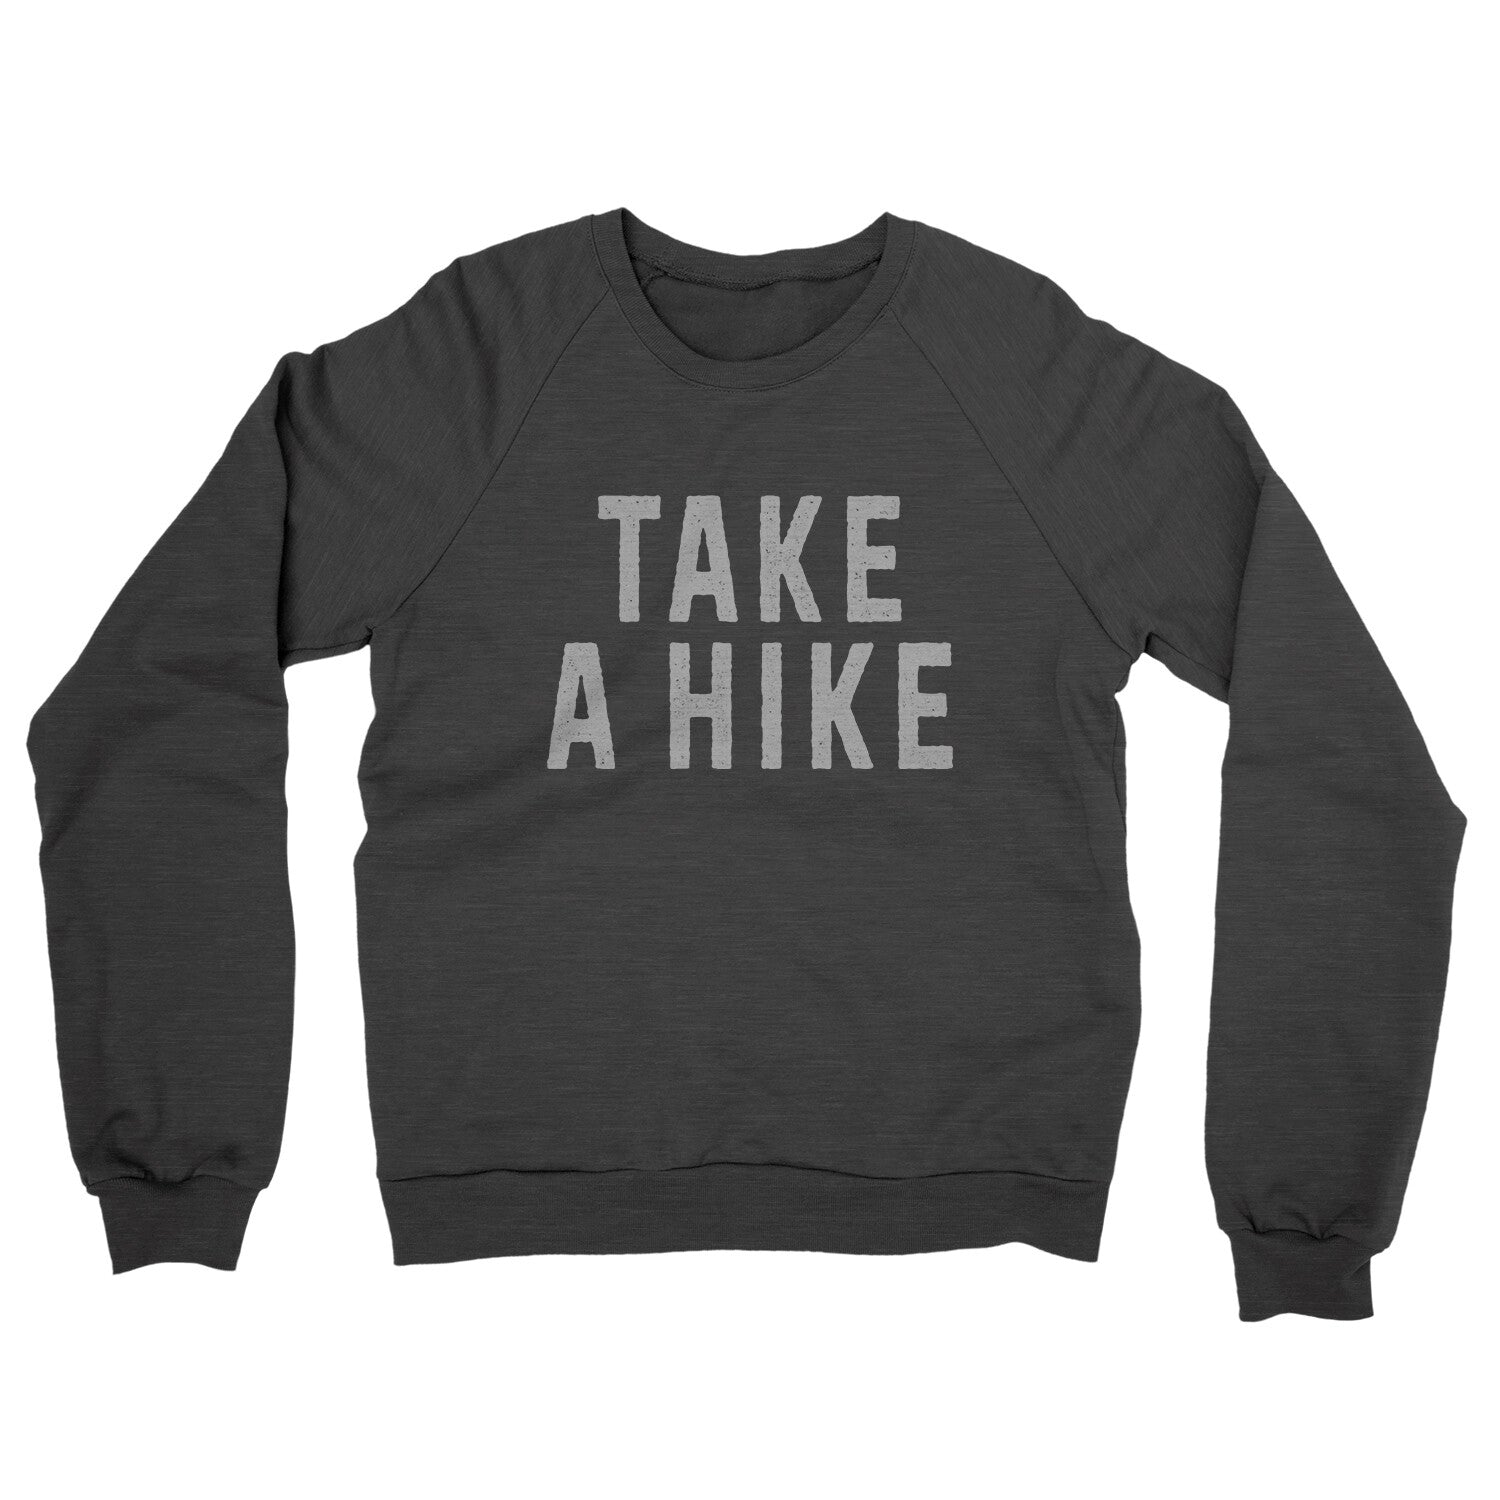 Take a Hike in Charcoal Heather Color